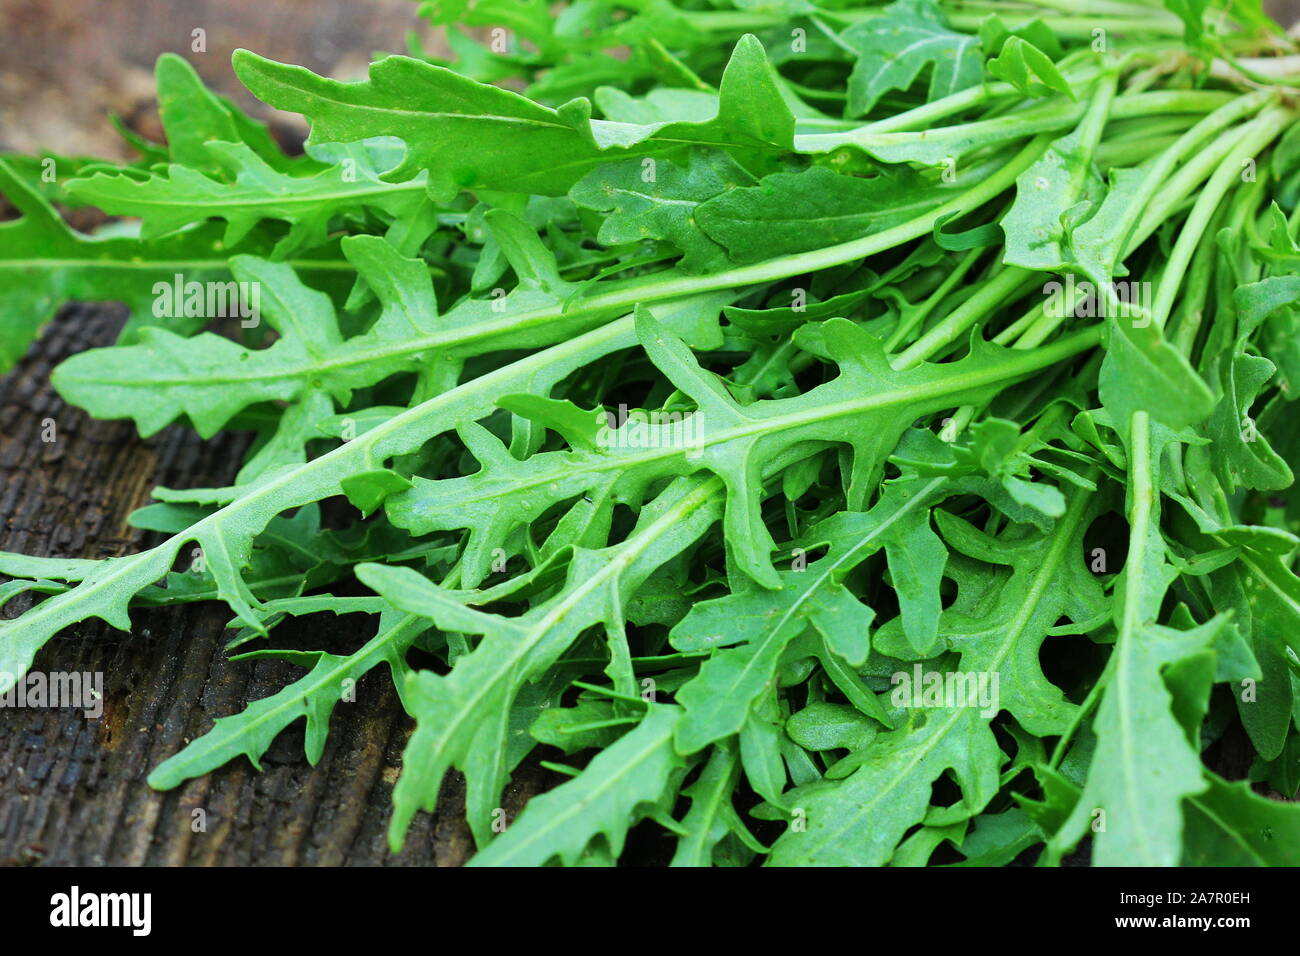 Fresh green arugula leaves on wooden rustic background . Rocket salad or rucola, healthy food, diet. Nutrition concept Stock Photo